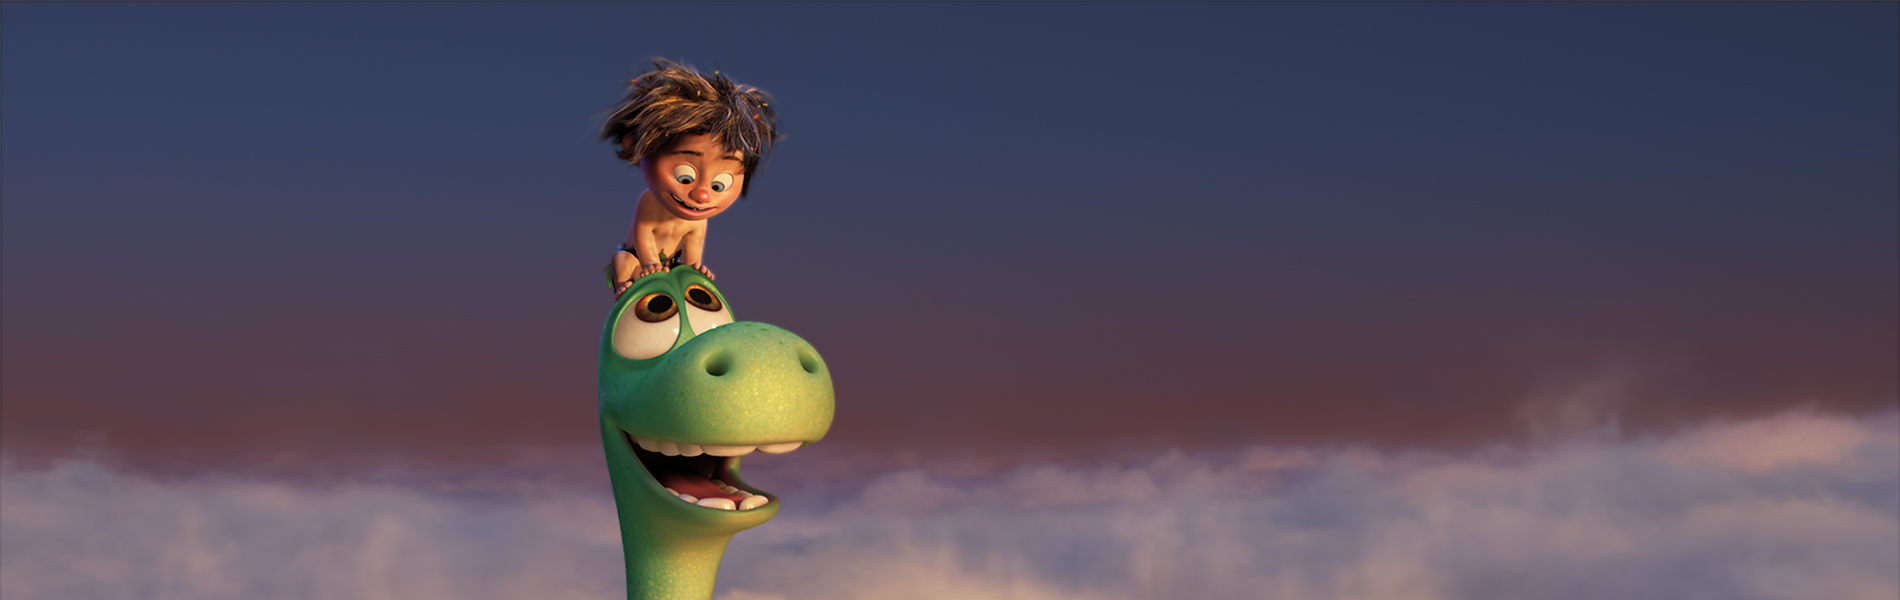 How To Use Disney•Pixar Movies To Teach Kids About Friendship